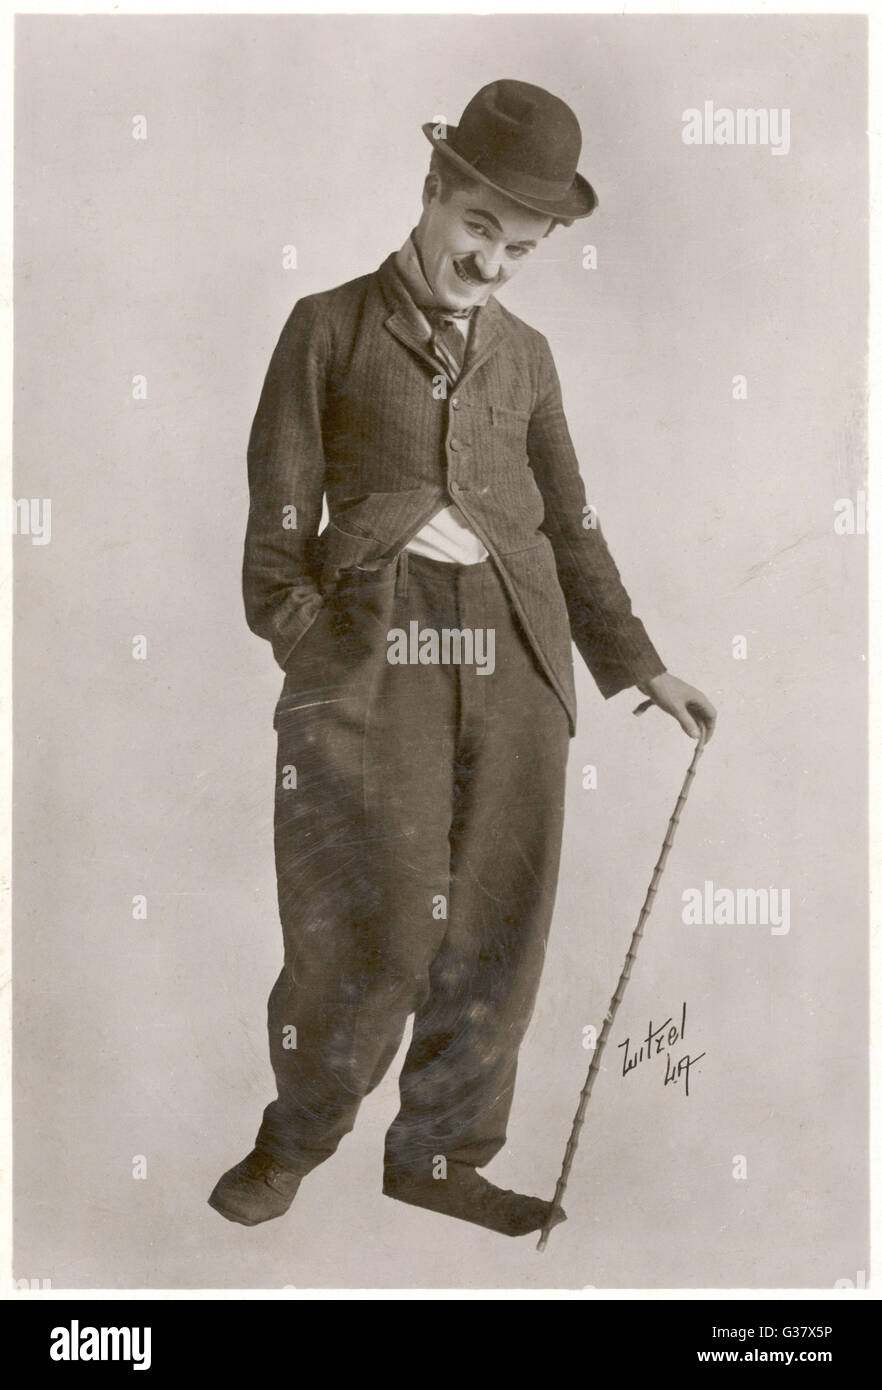 CHARLIE CHAPLIN (Sir Charles Spencer)  English comedian and actor       Date: 1889 - 1977 Stock Photo